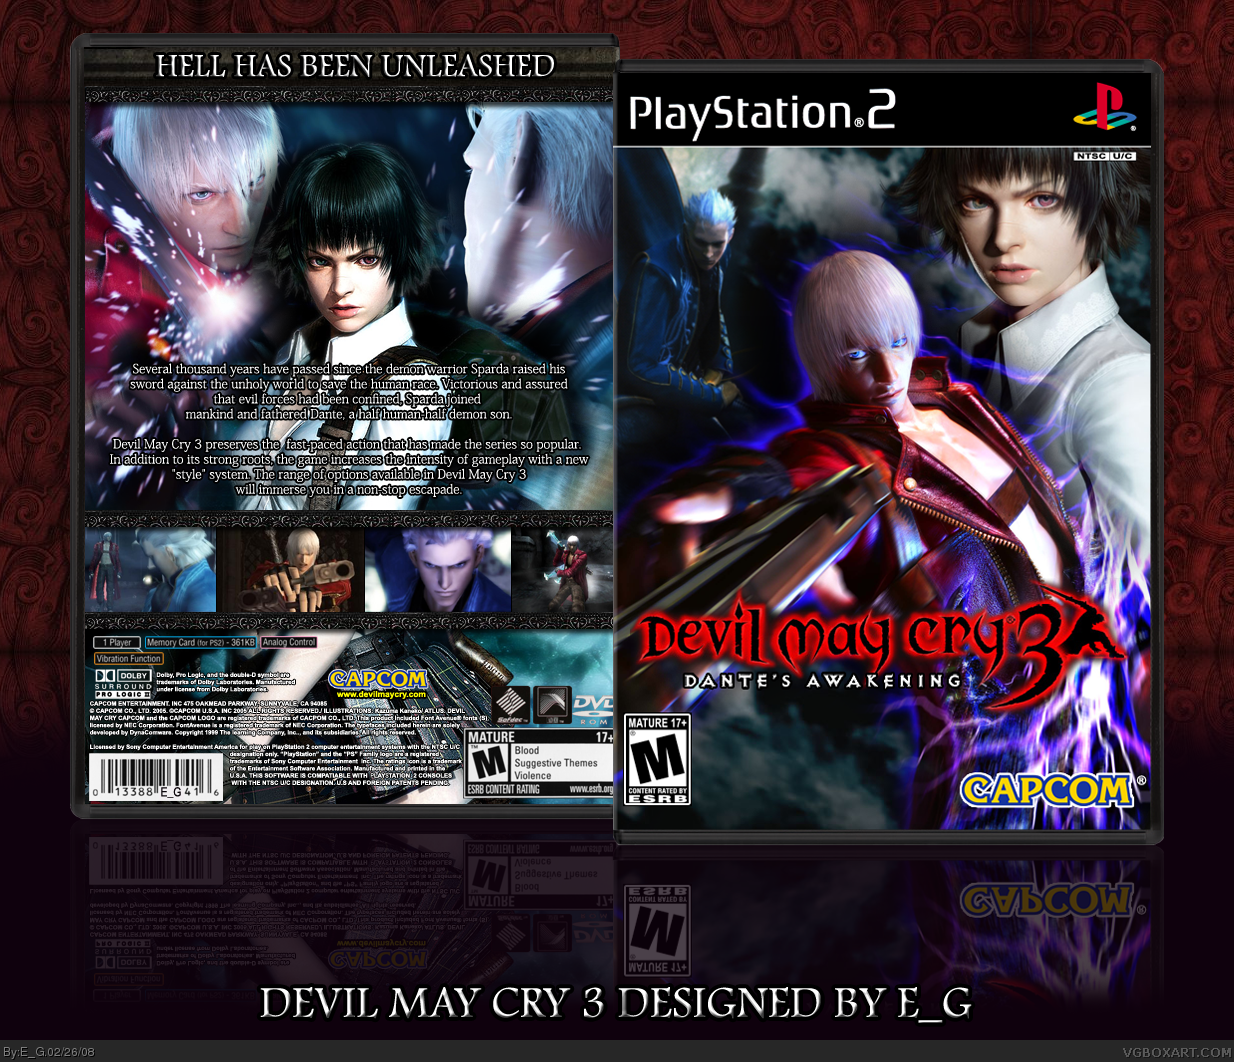 Ps3 devil may. Devil May Cry 3 PLAYSTATION 2 обложка. DMC 3 ps2 ROM. Devil my Cry 3 ps2. Devil May Cry 3 ps2 диск.